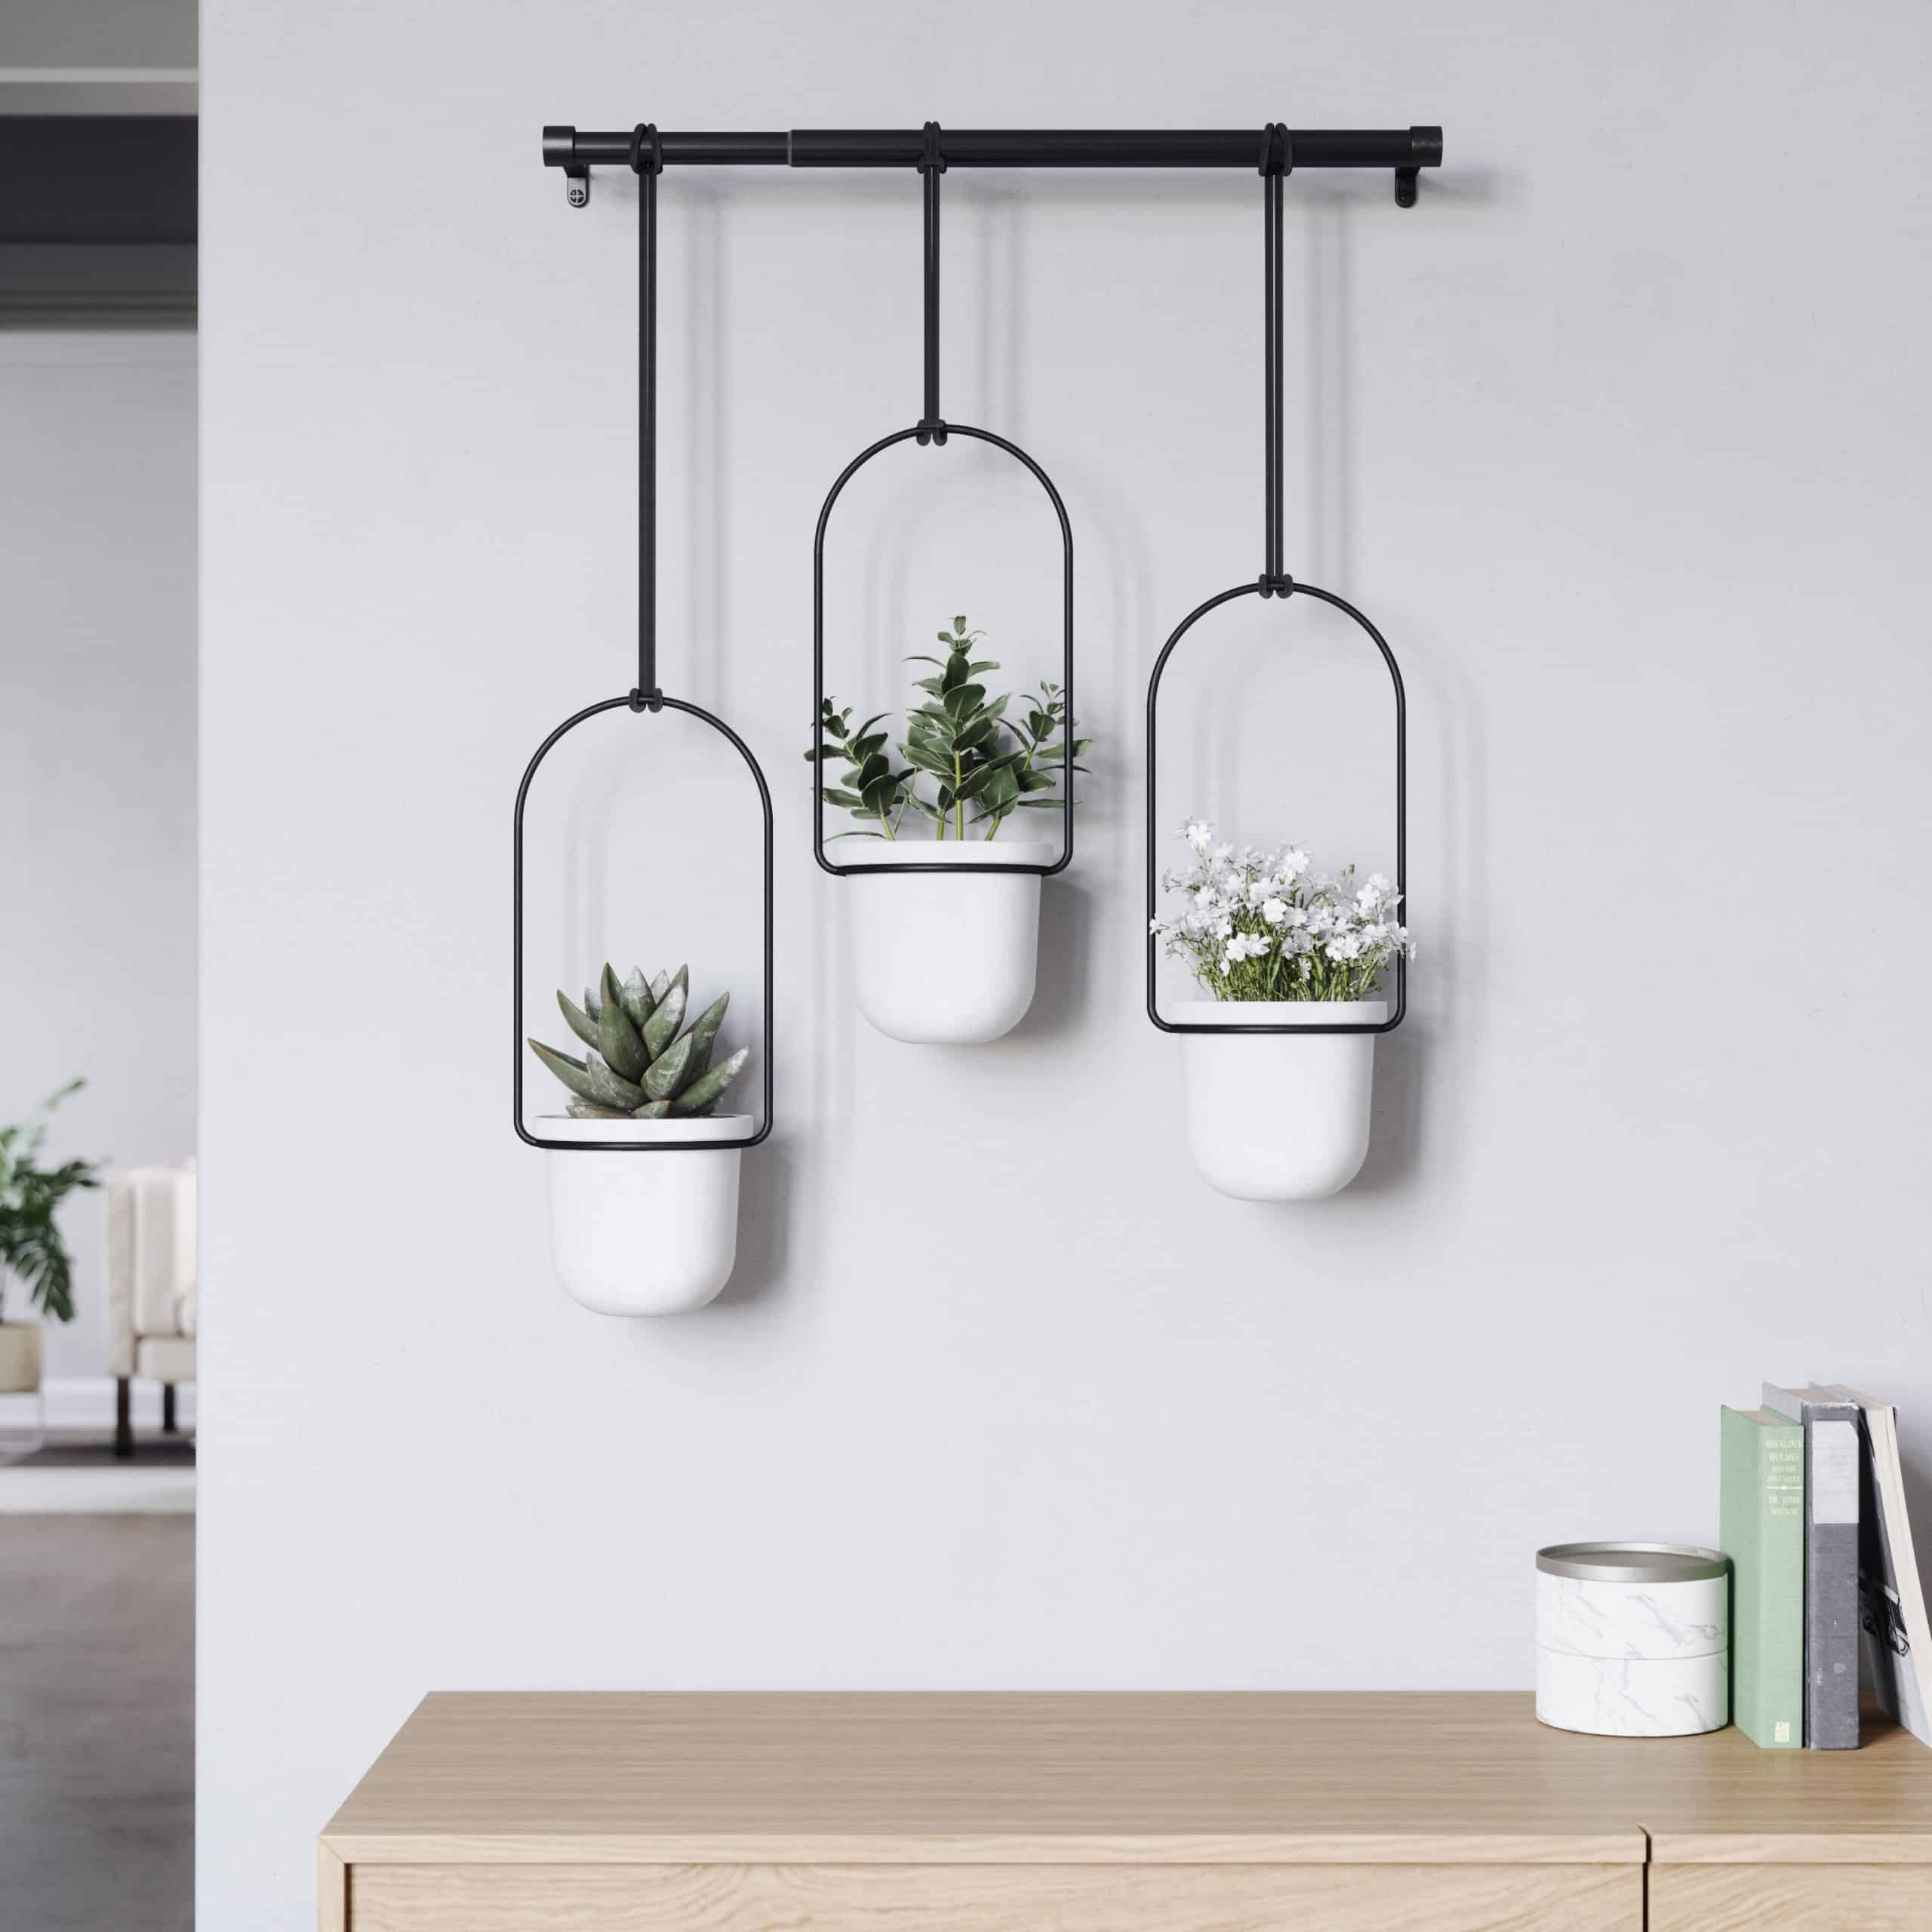 A Three-Piece Hanging Planter Looks Modern and Chic